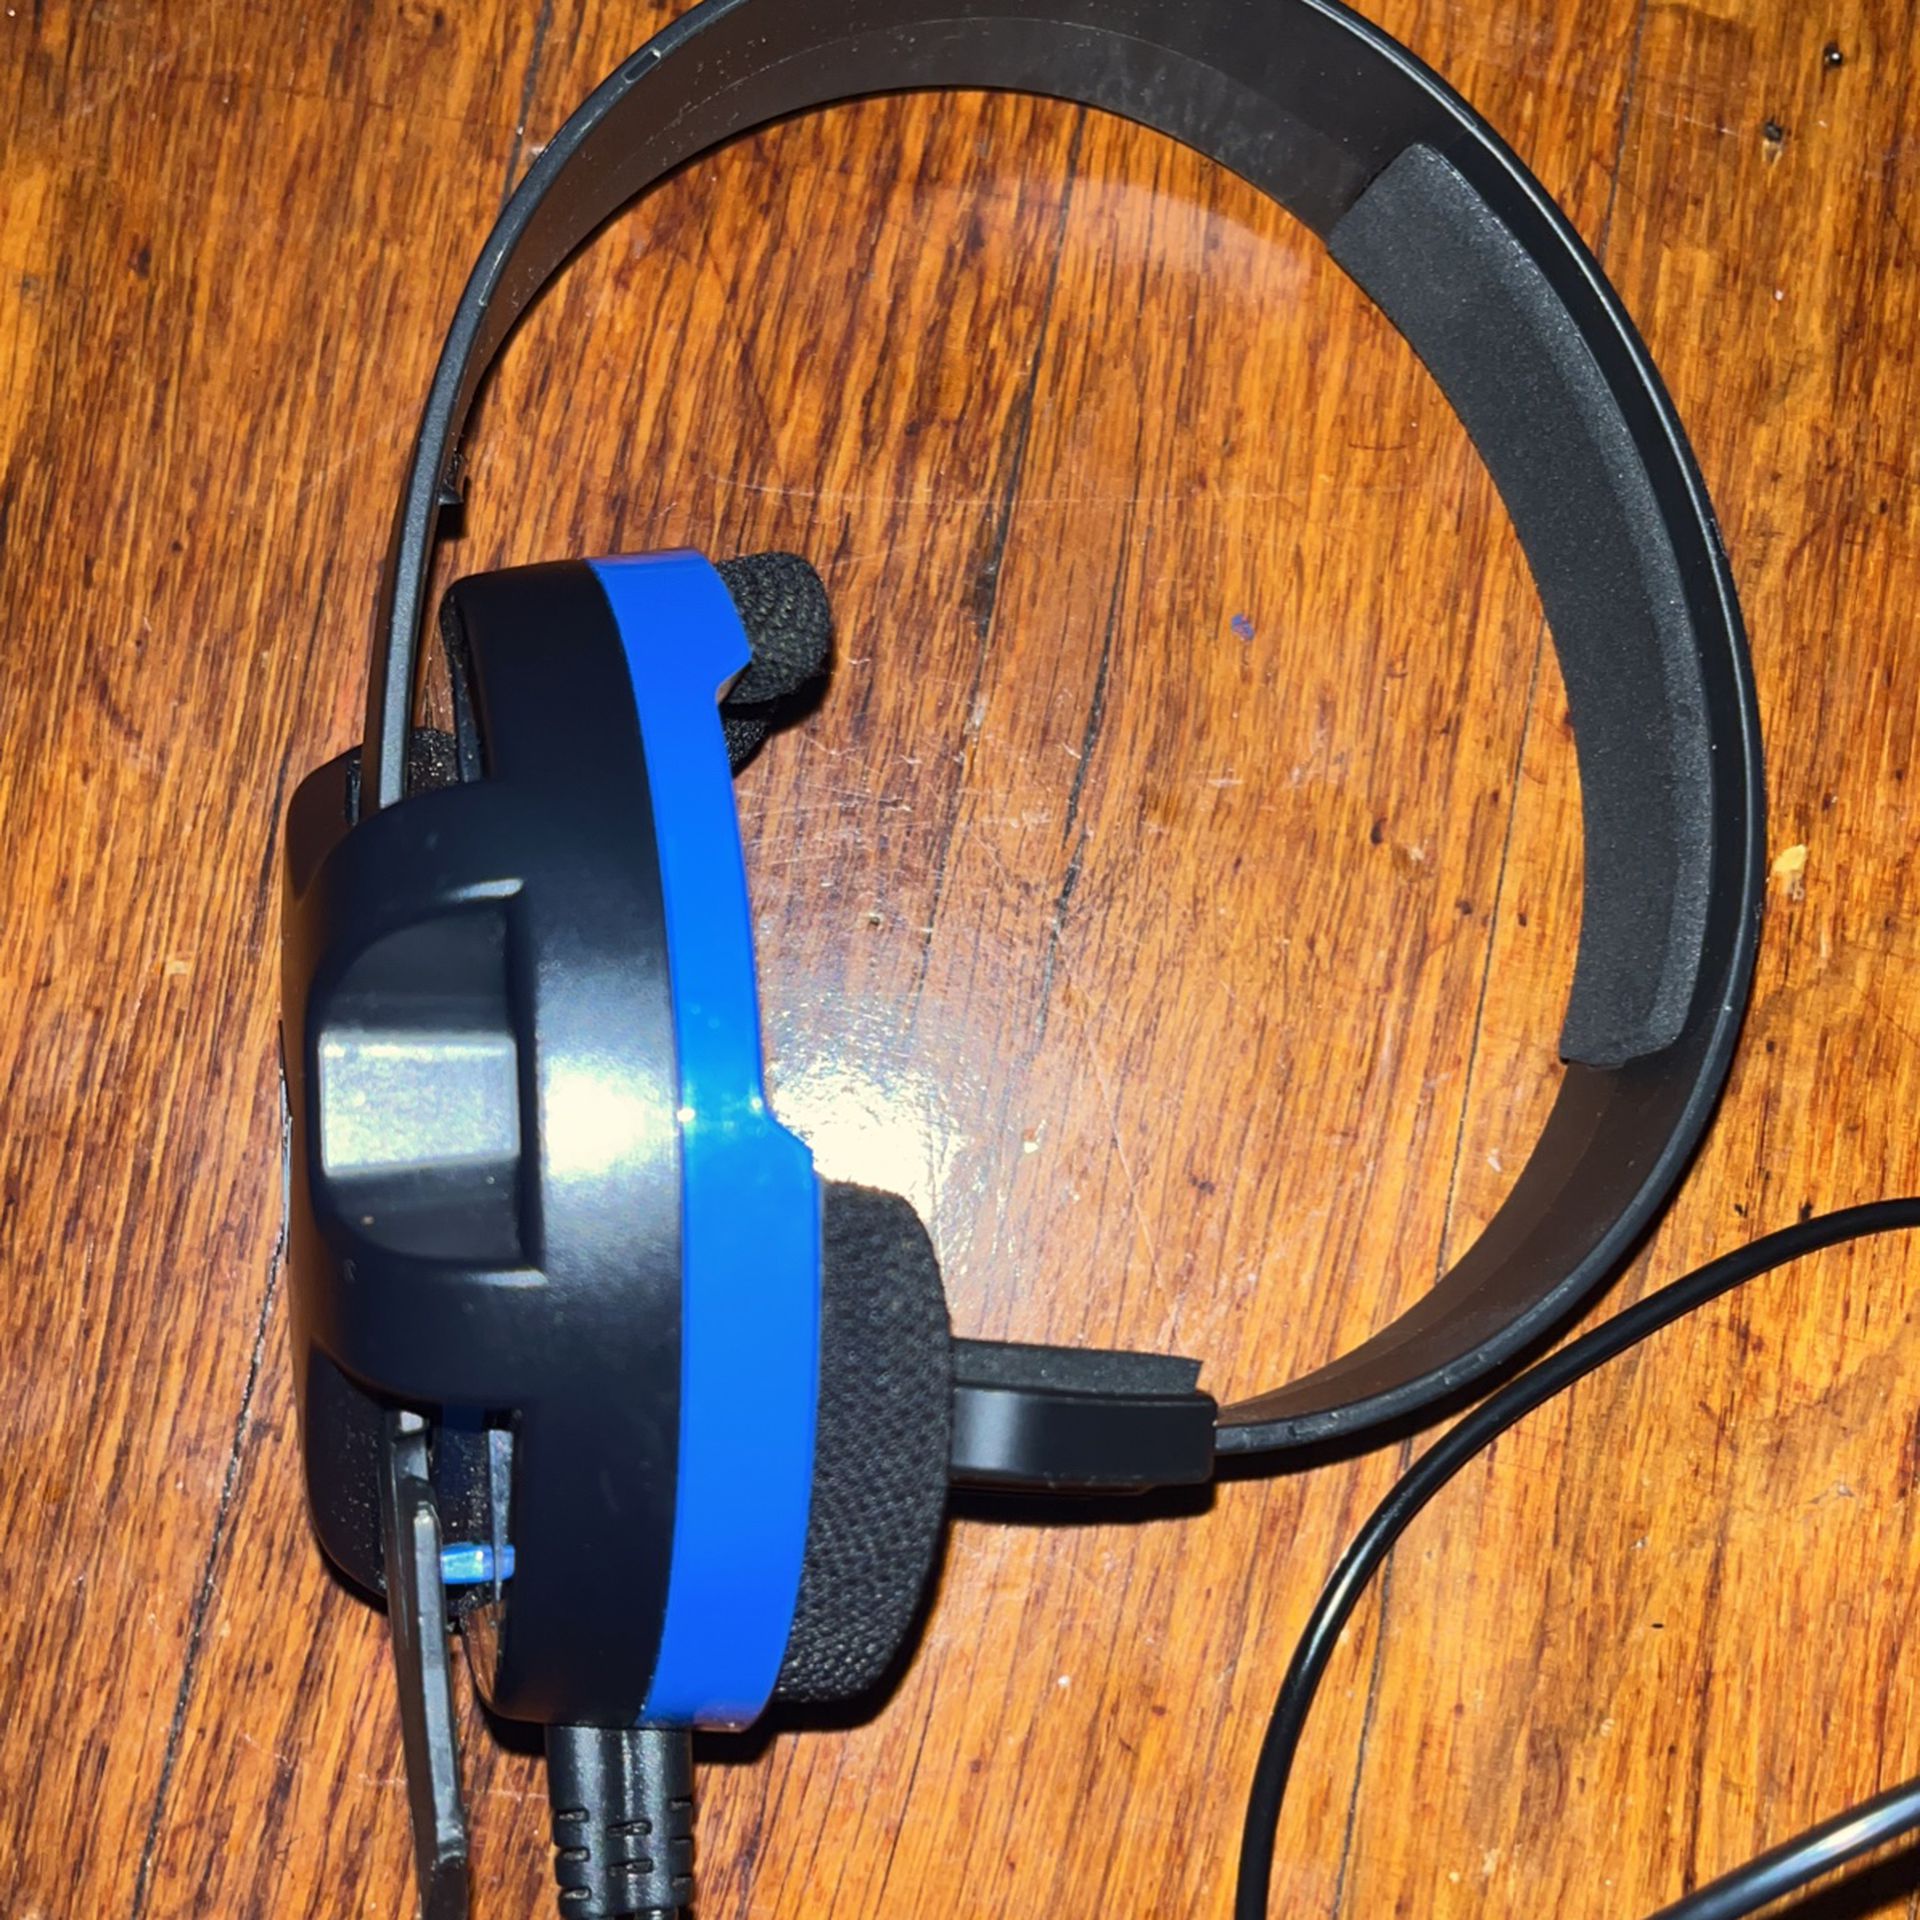 PS4 Headset Sale Baldwin, NY - OfferUp